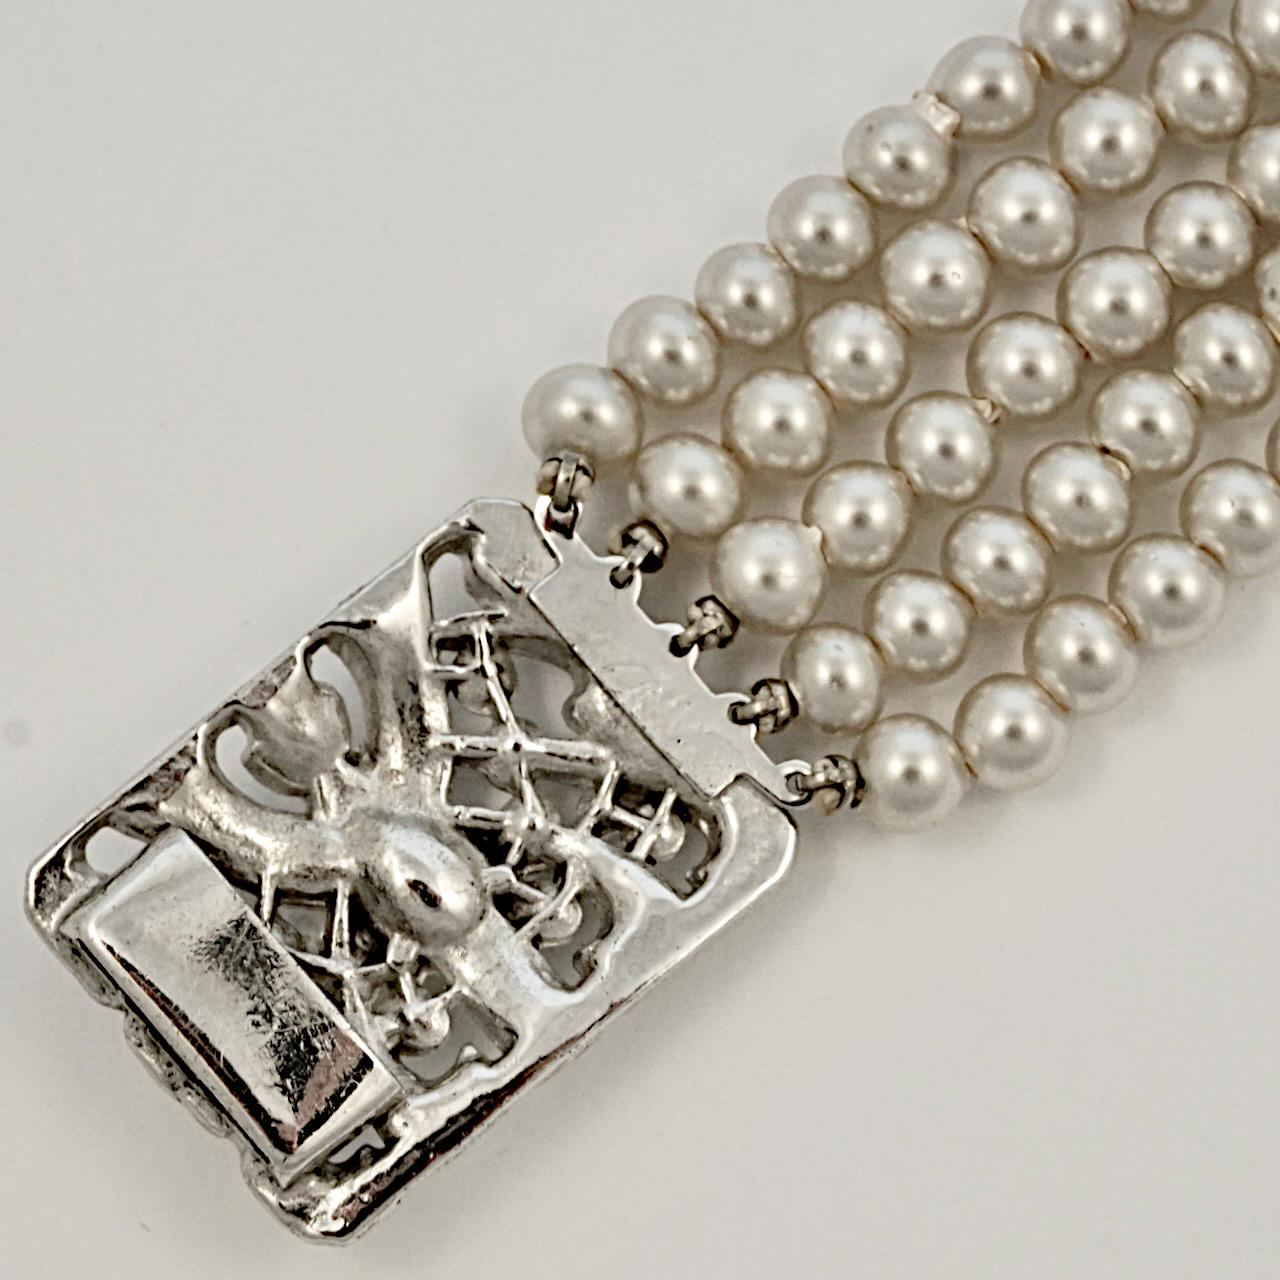 Five Strand Faux Pearl Bracelet with a Rhinestone Silver Tone Clasp In Good Condition For Sale In London, GB